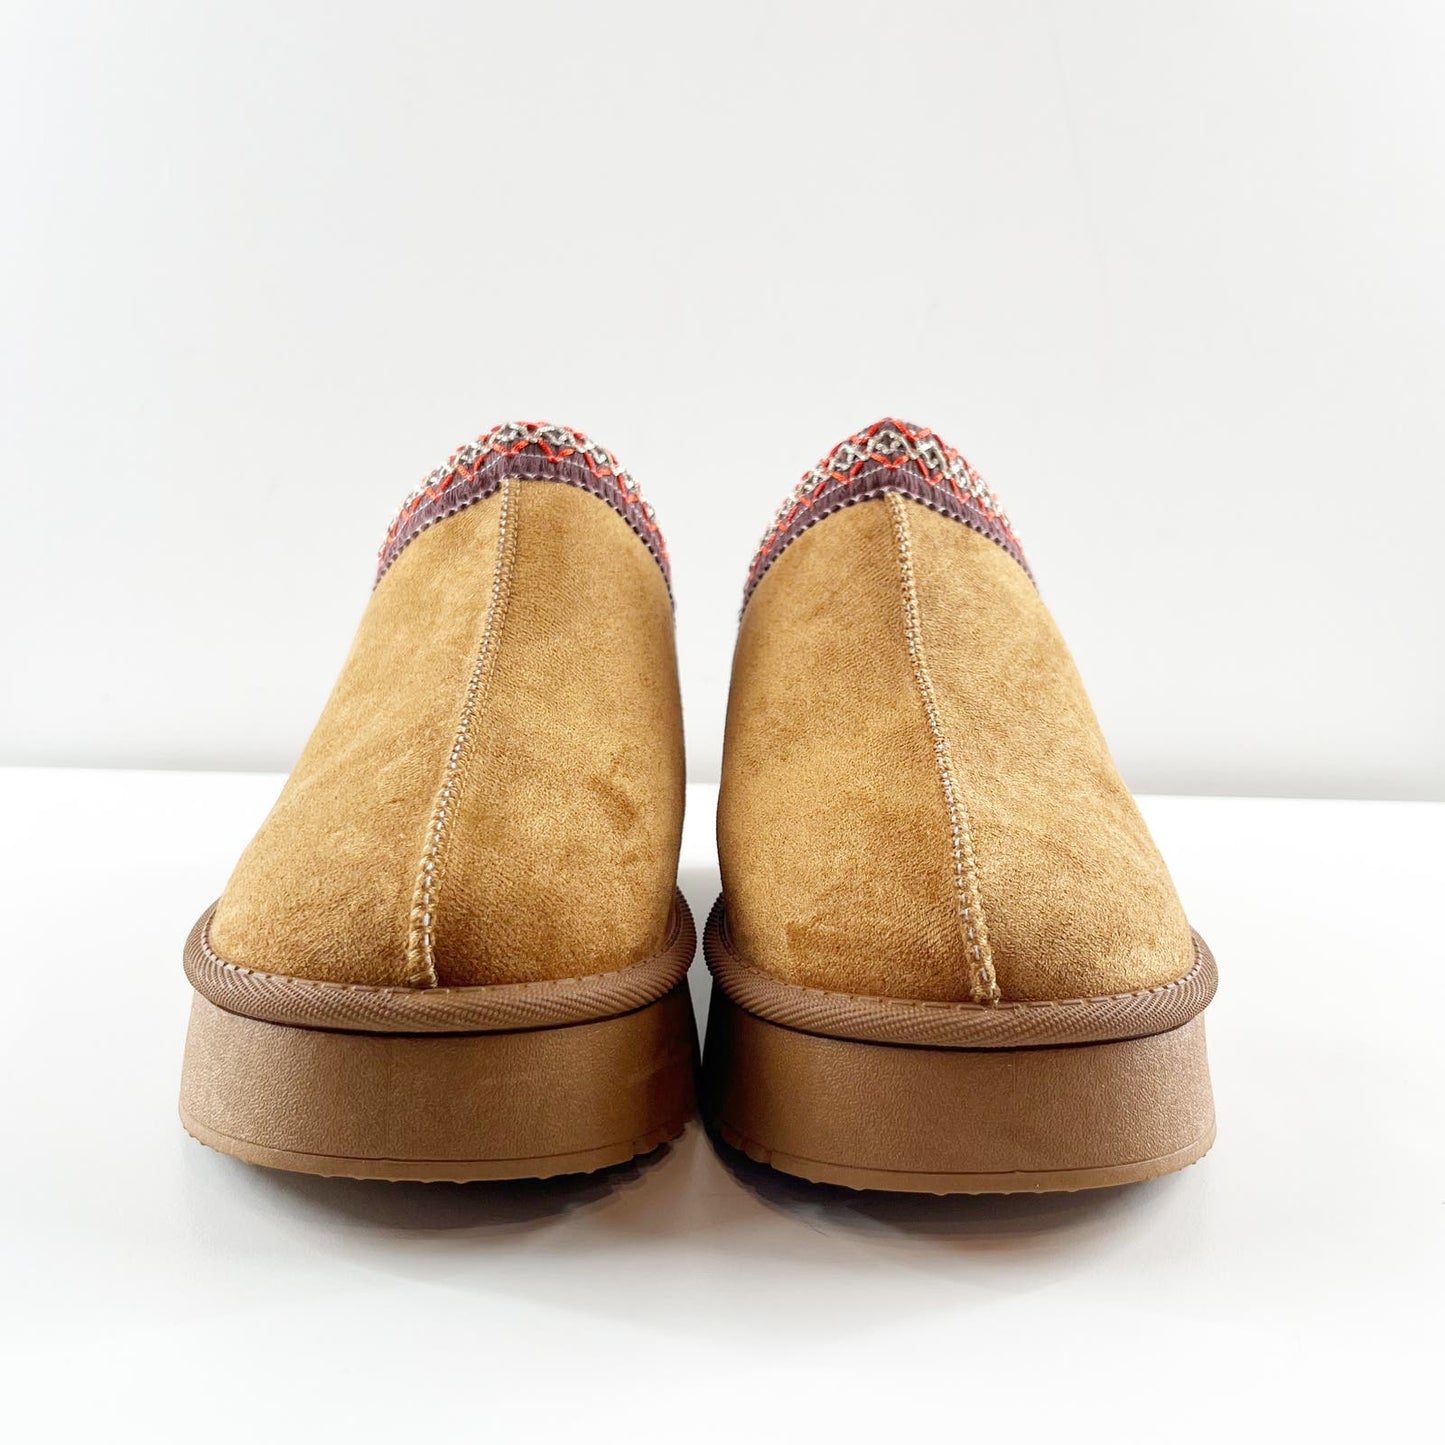 Platform Suede Slip On Embroidered Trim Mule Slippers Shoes Brown 10